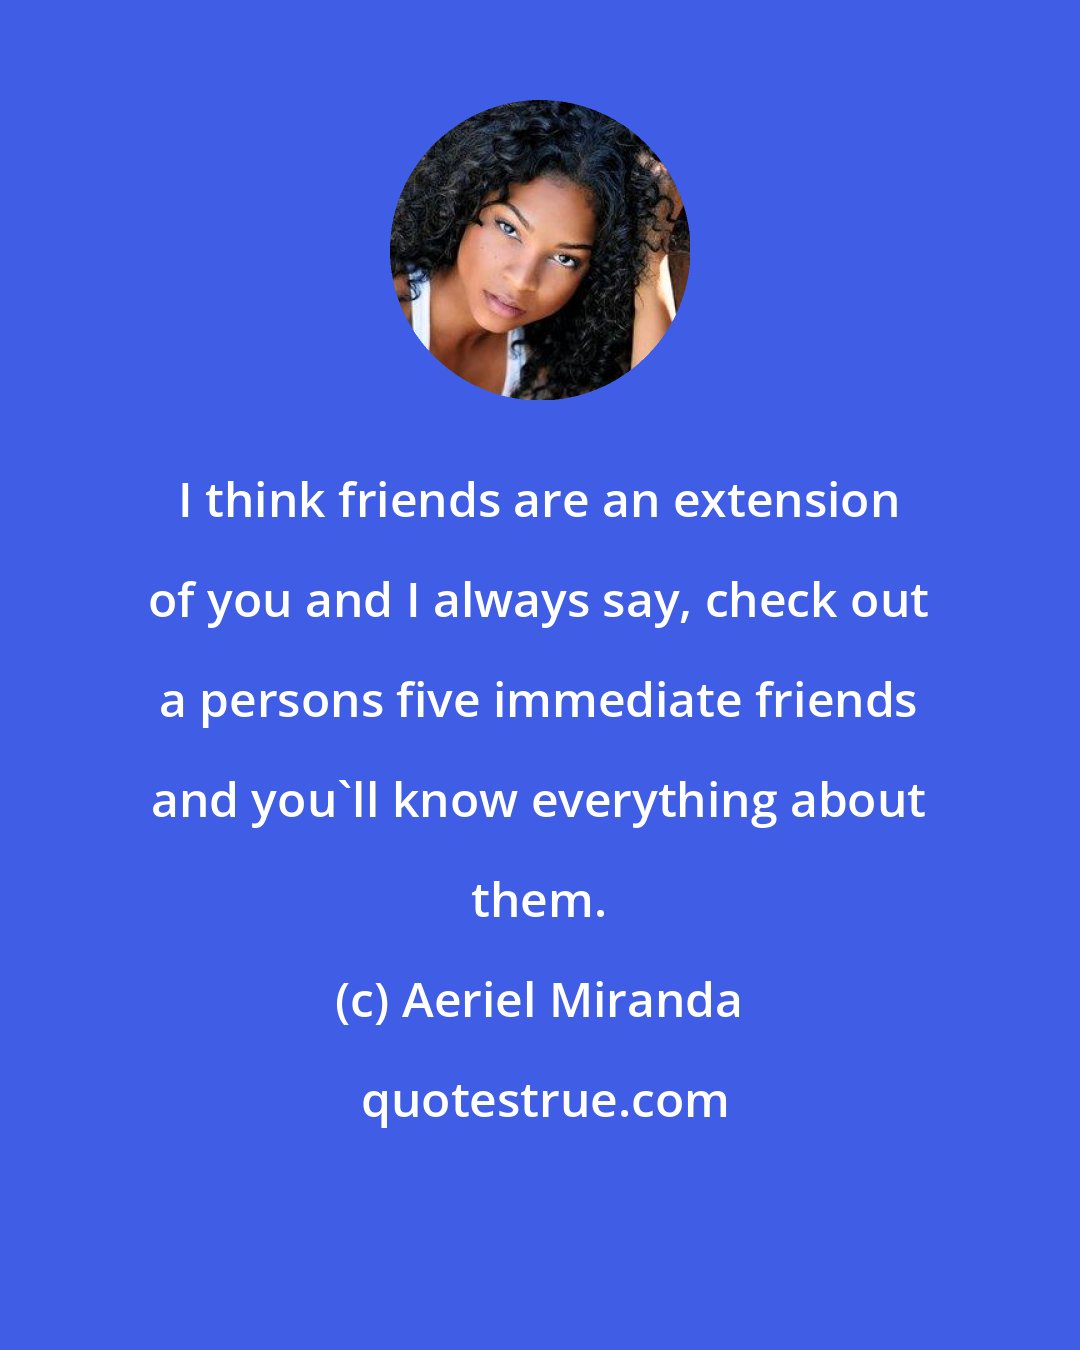 Aeriel Miranda: I think friends are an extension of you and I always say, check out a persons five immediate friends and you'll know everything about them.